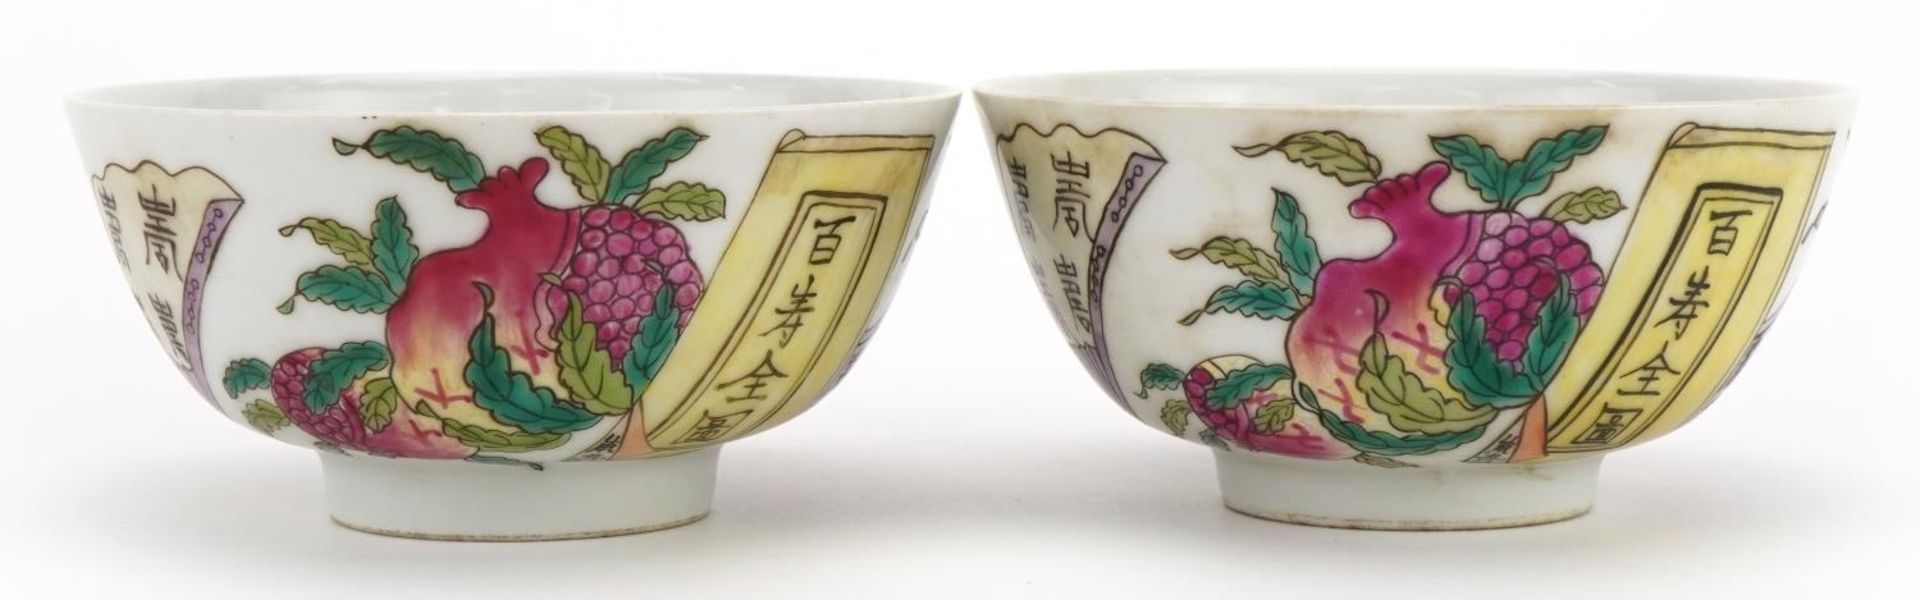 Pair of Chinese porcelain bowls hand painted with peaches and calligraphy, six figure iron red